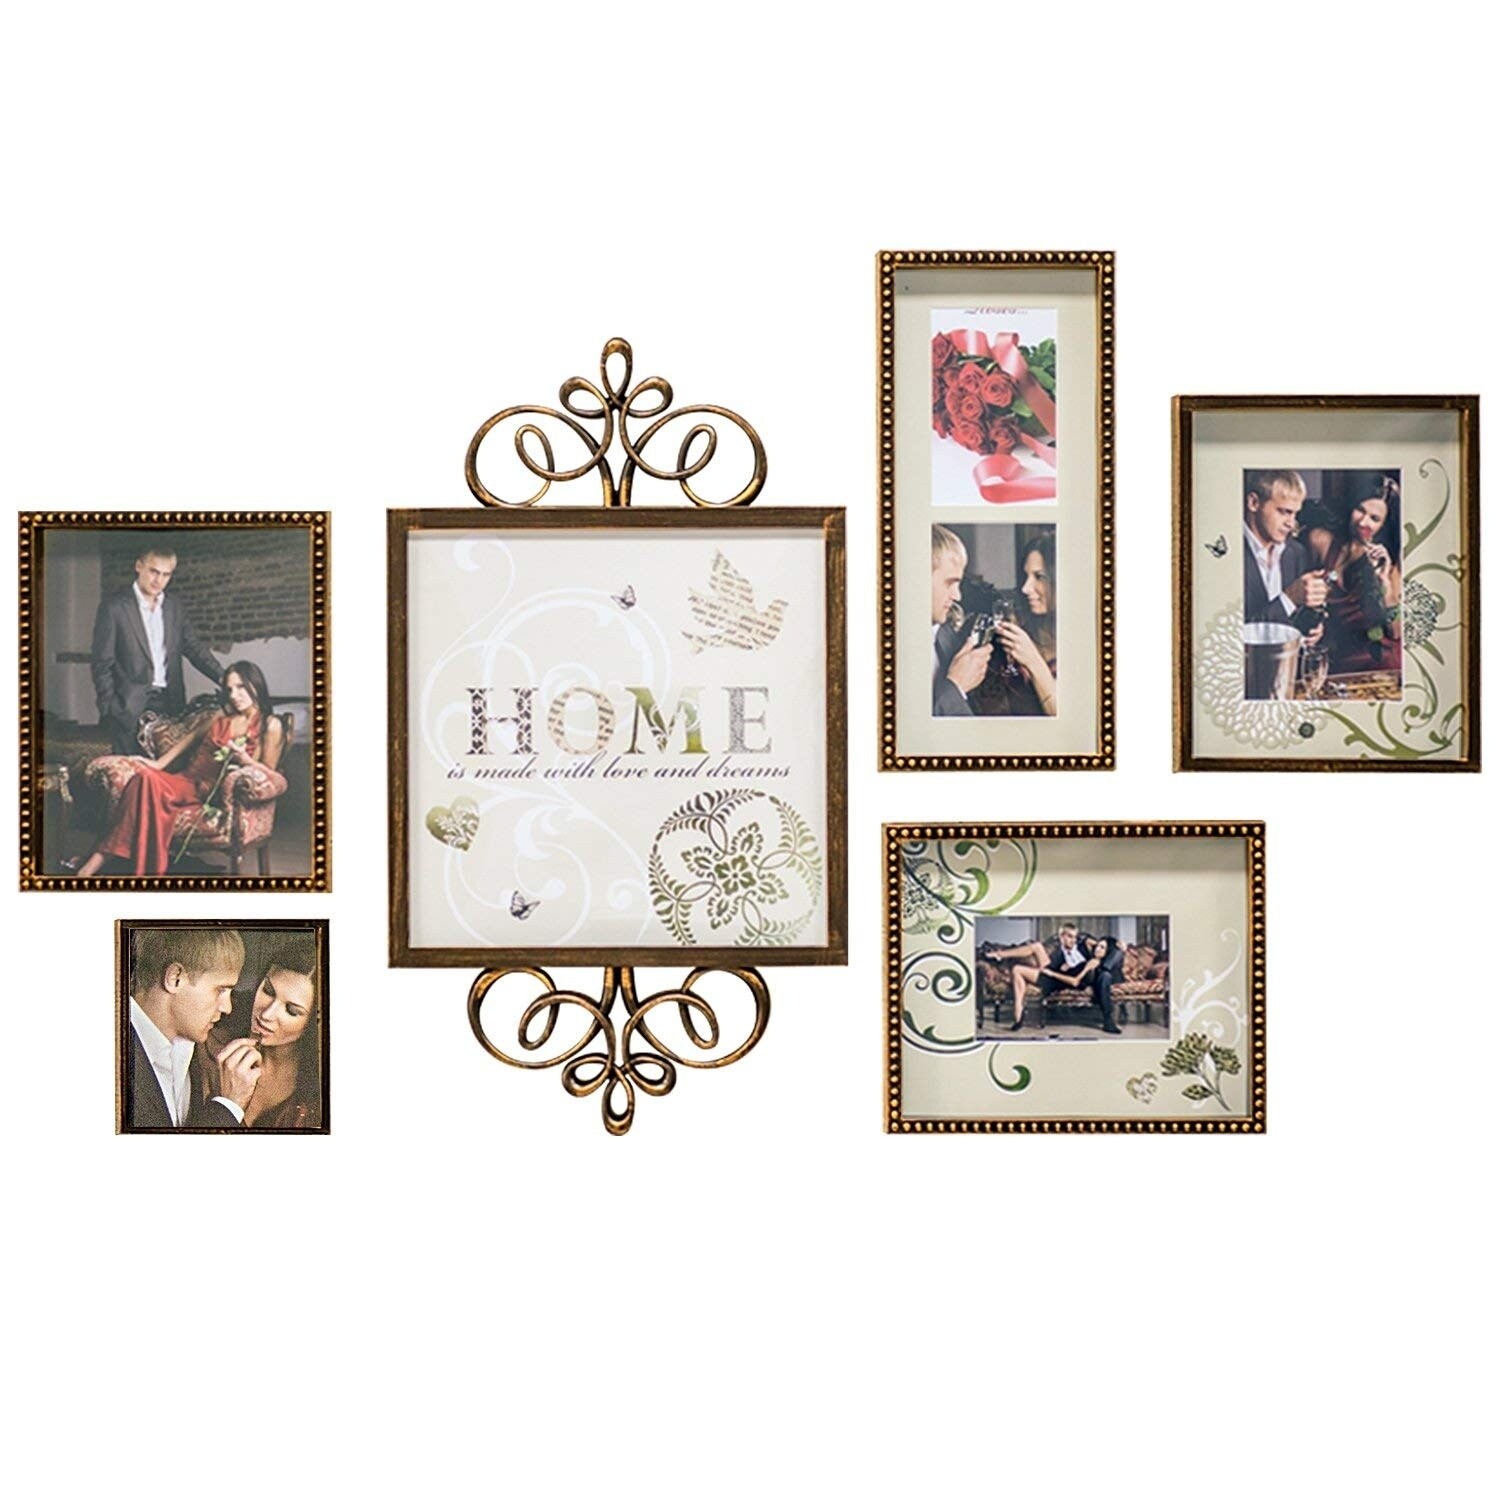 Jerry & Maggie - Luxury Typography Sets | Photo Frame | Wall Decor Bar - Wall Decor Combination - Gold Black PVC Picture Large Frame Selfie Gallery